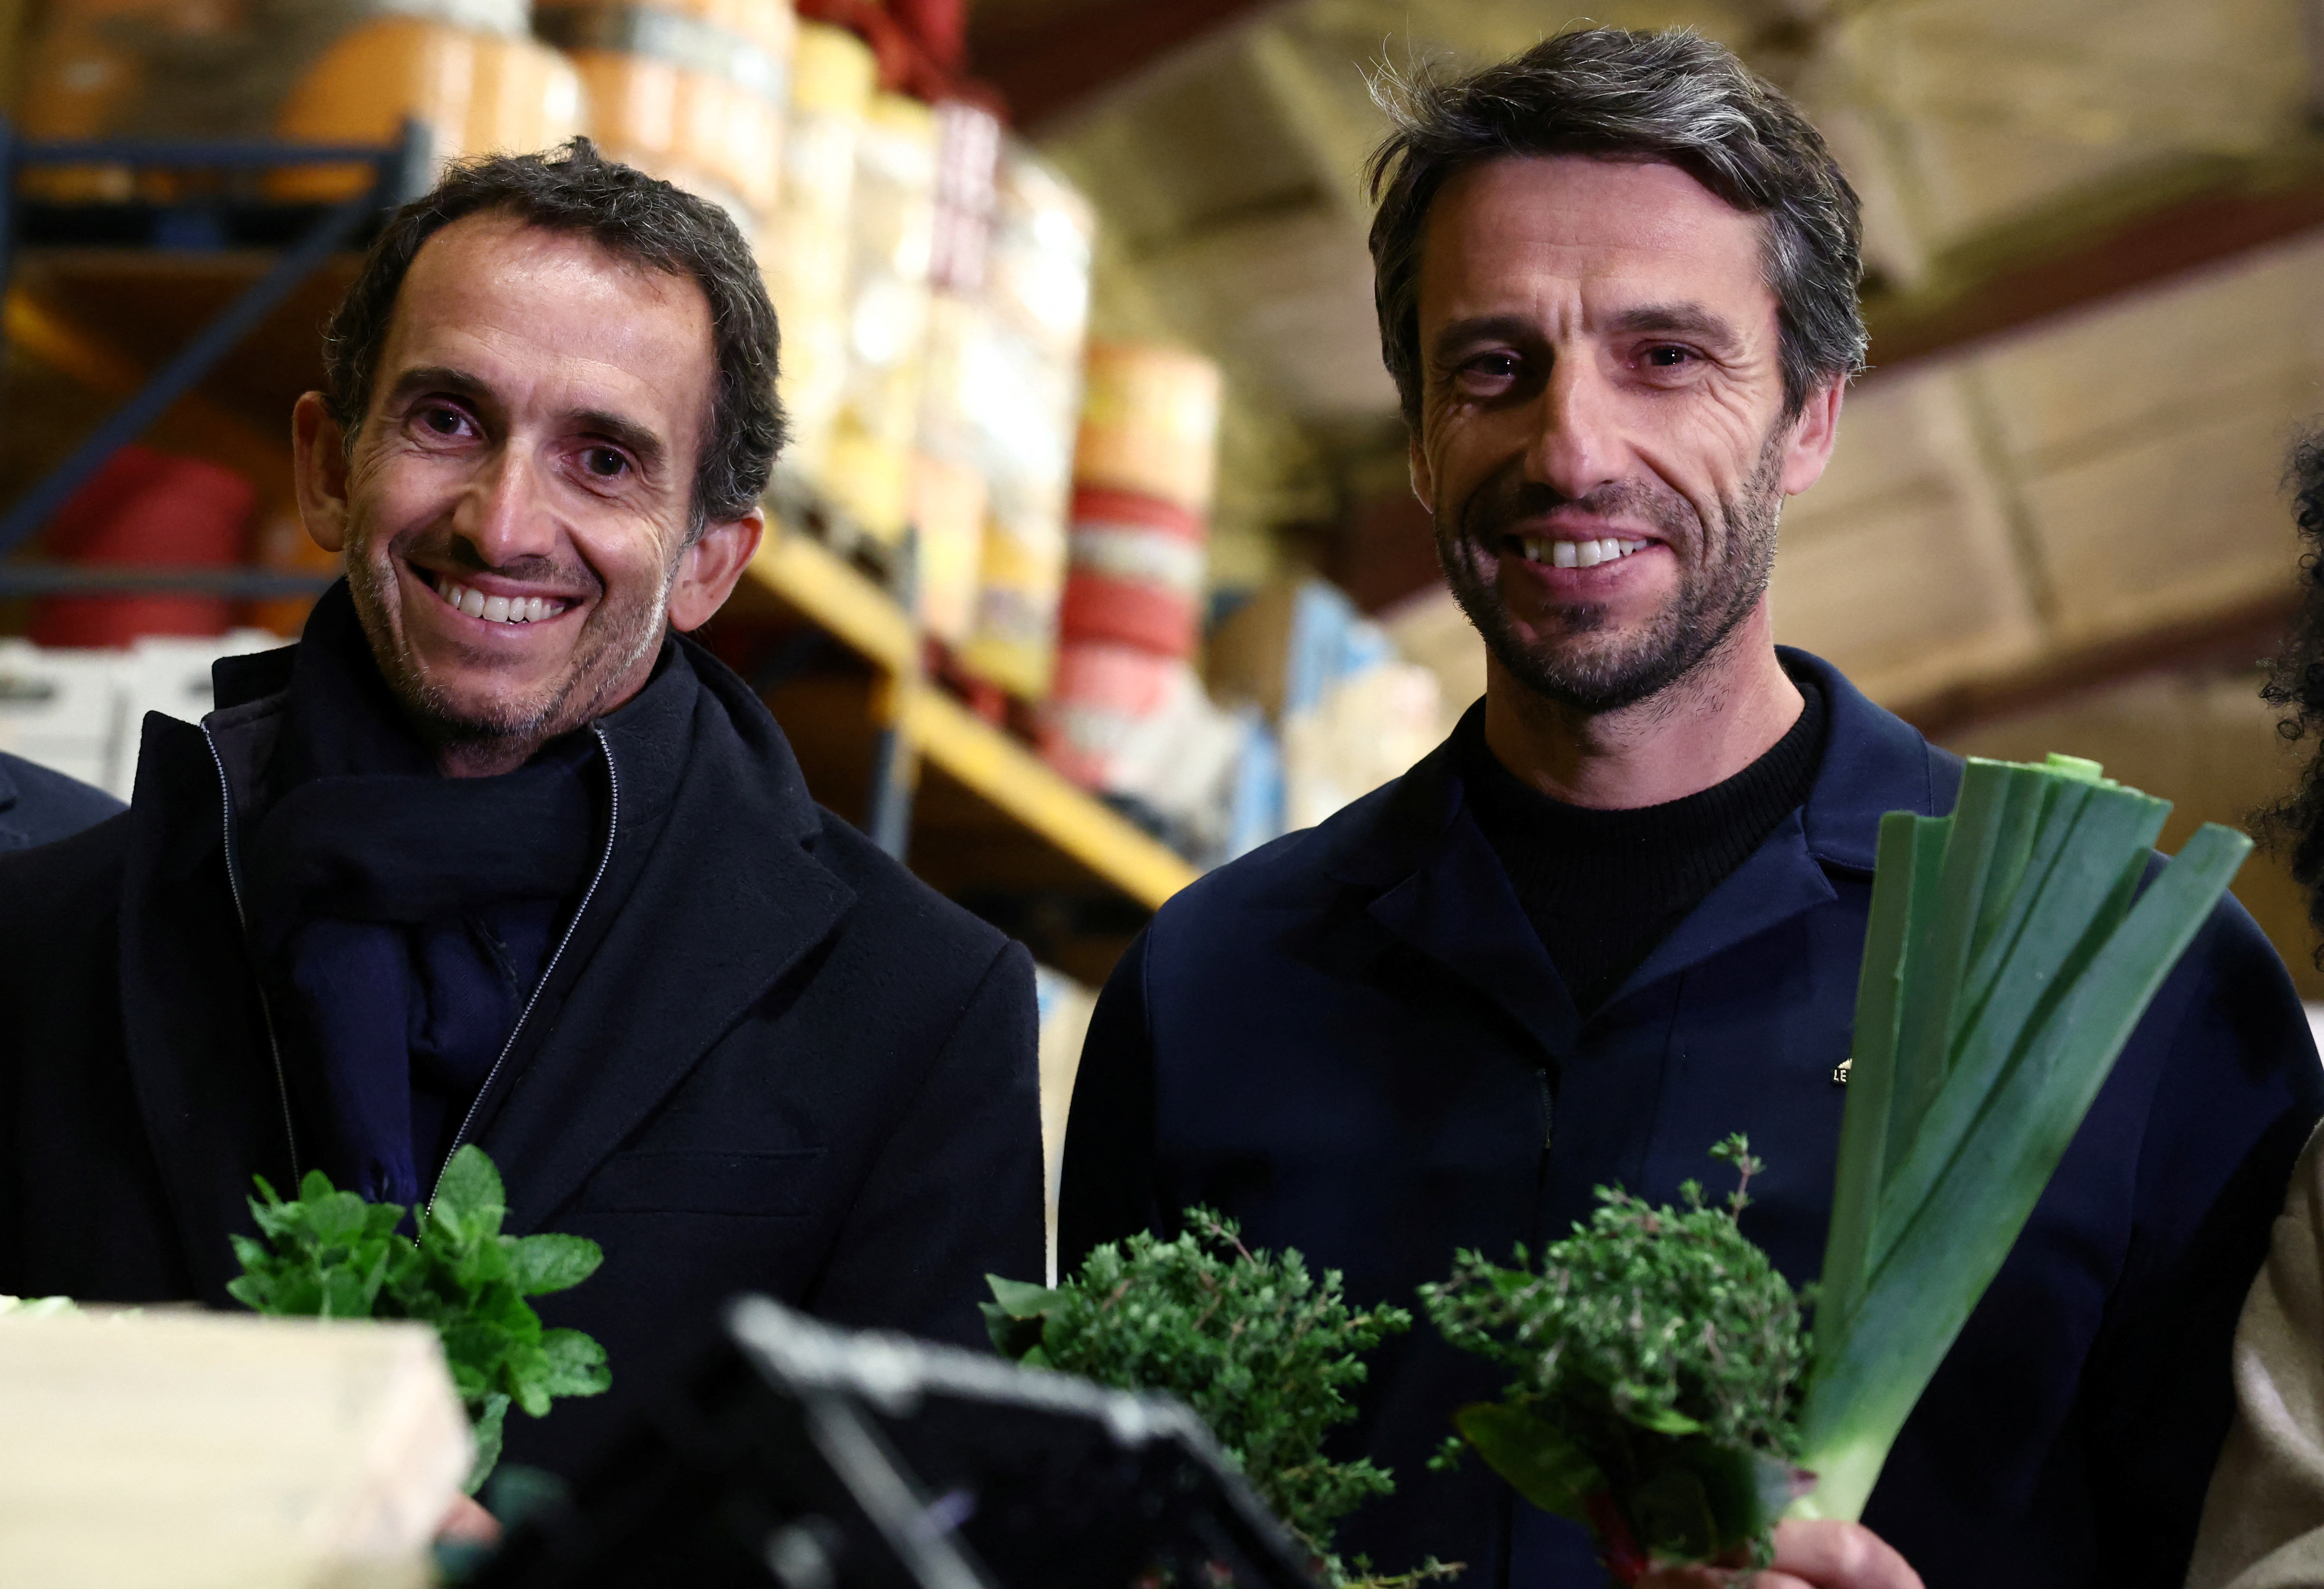 Carrefour presents its strategy to provide fresh products for athletes during Paris 2024